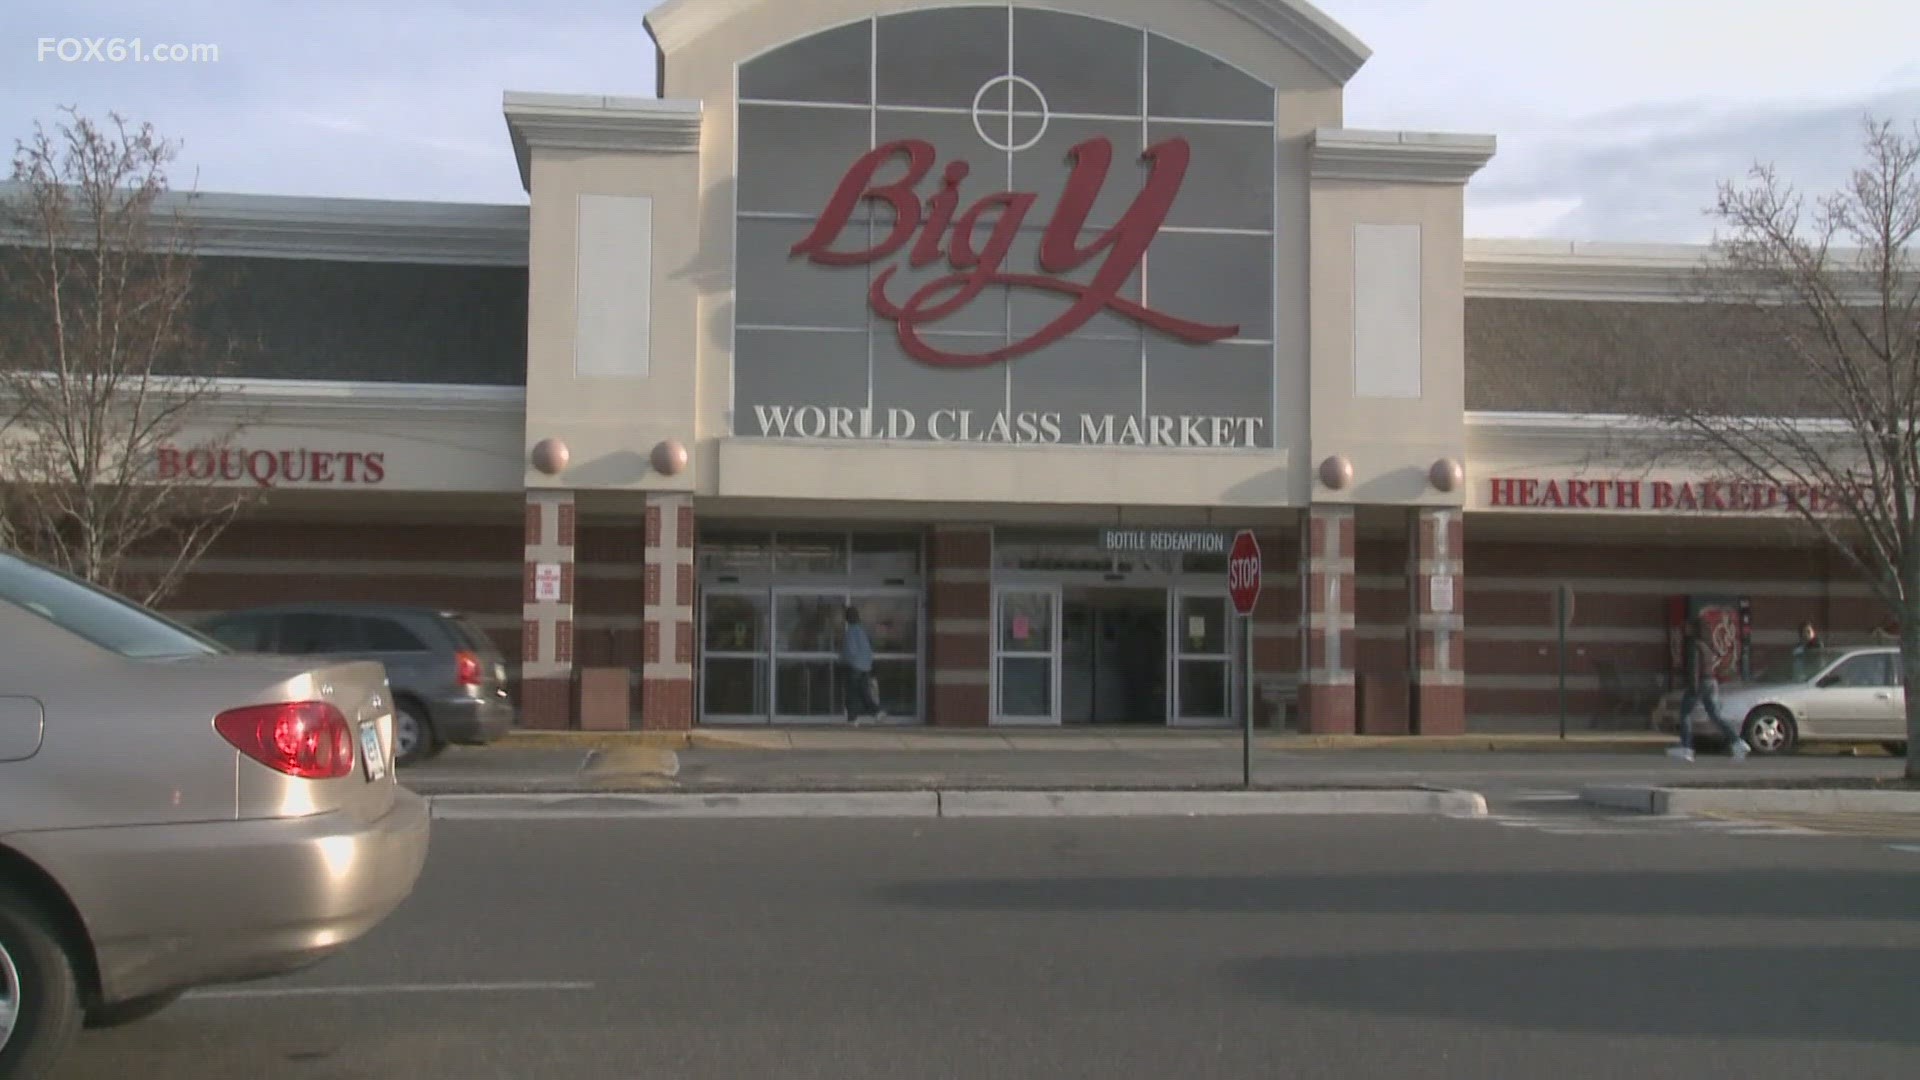 Big Y is set to continue its Connecticut expansion with two new grocery stores in Fairfield County.